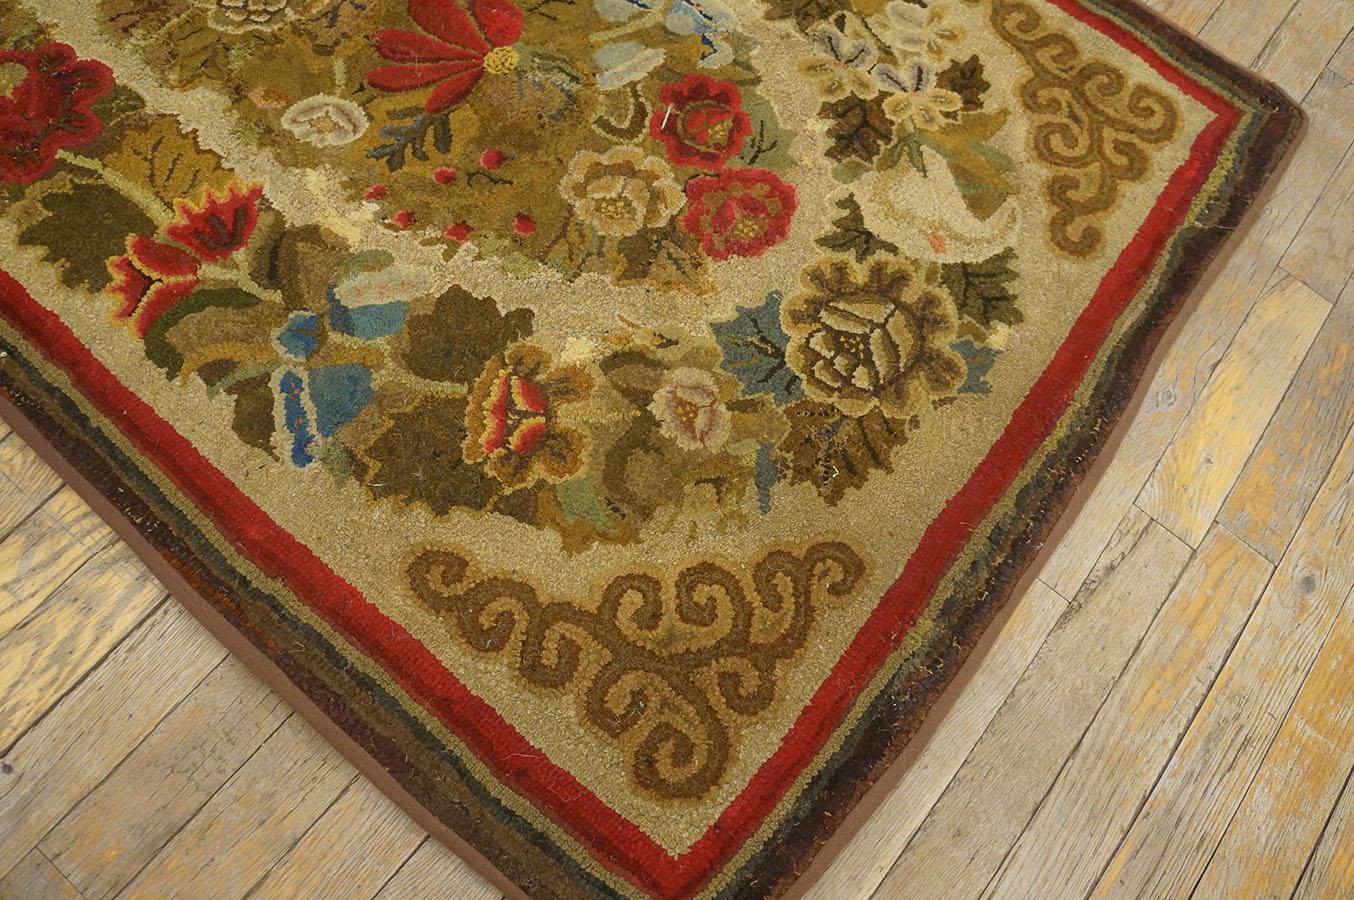 19th Century American Hooked Rug ( 3'3'' x 5' - 99 x 152 ) For Sale 4